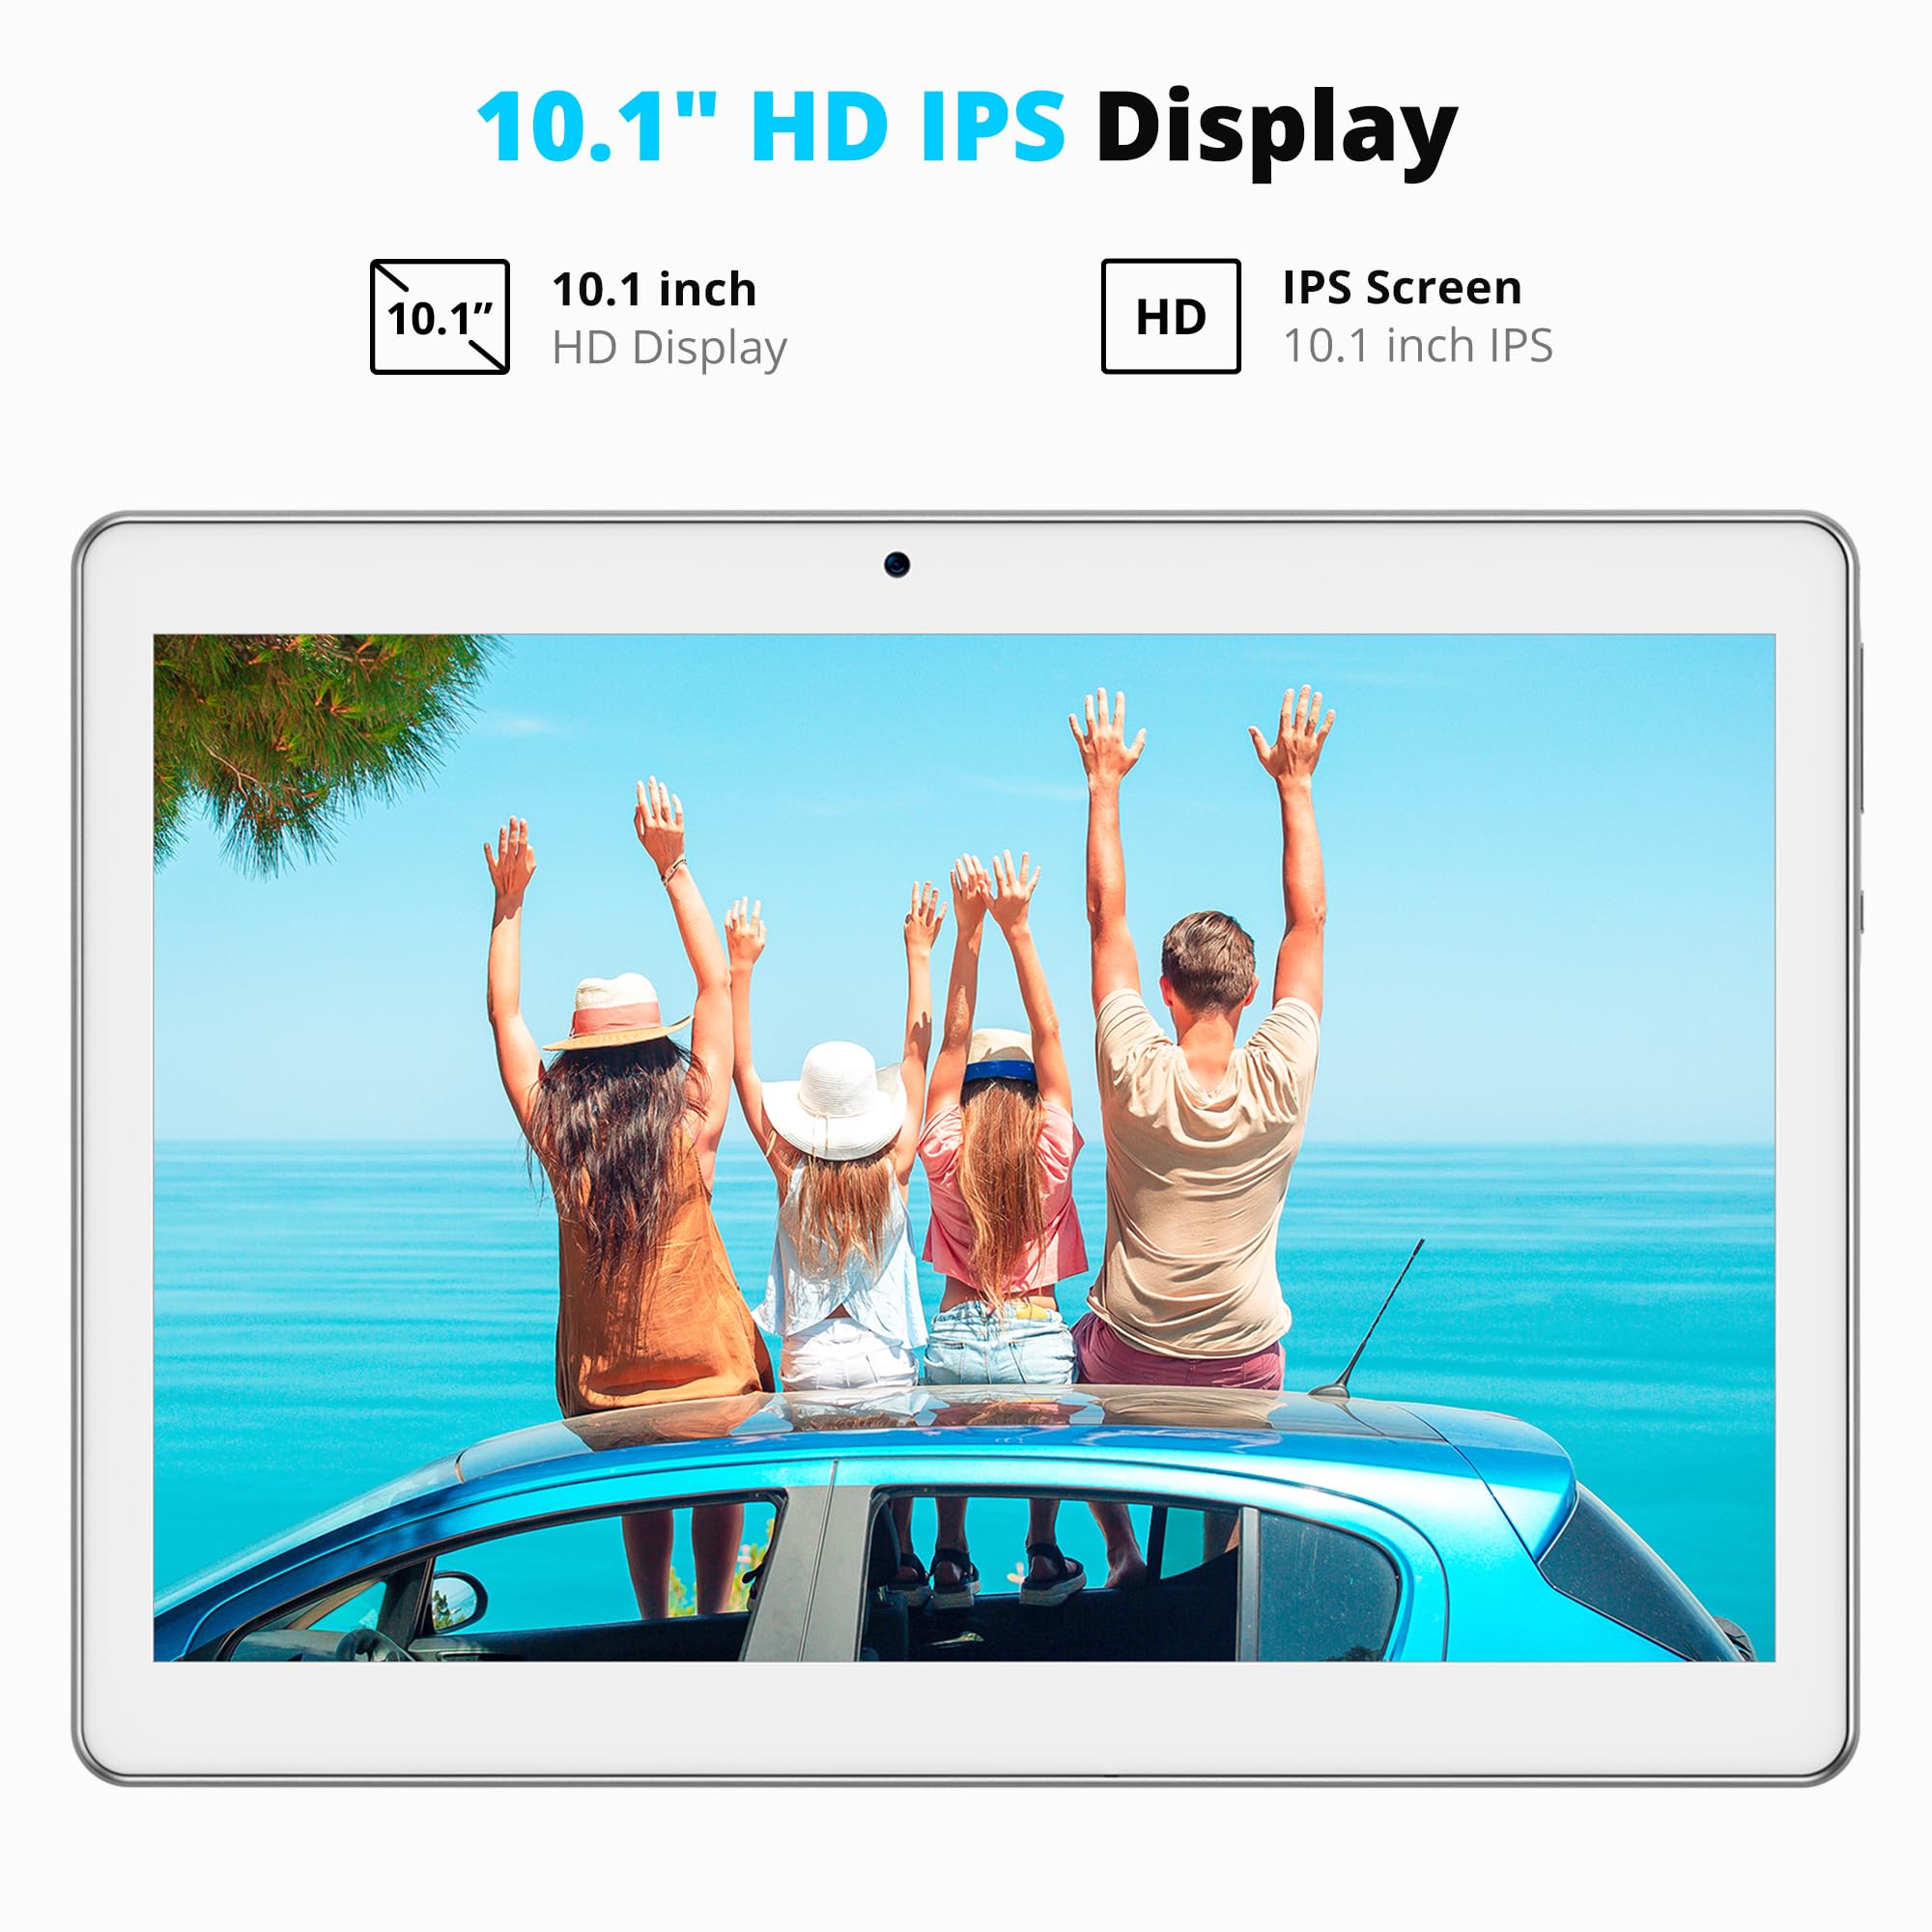 Notepad K10 Android Tablet 10 inch with 32GB Storage, 256GB Expandable Storage, Android 12 Tablet, Quad Core Processor, 10.1 inch IPS HD Display, 8MP Camera, 2.4Ghz & 5Ghz WiFi Tablet, Slvier